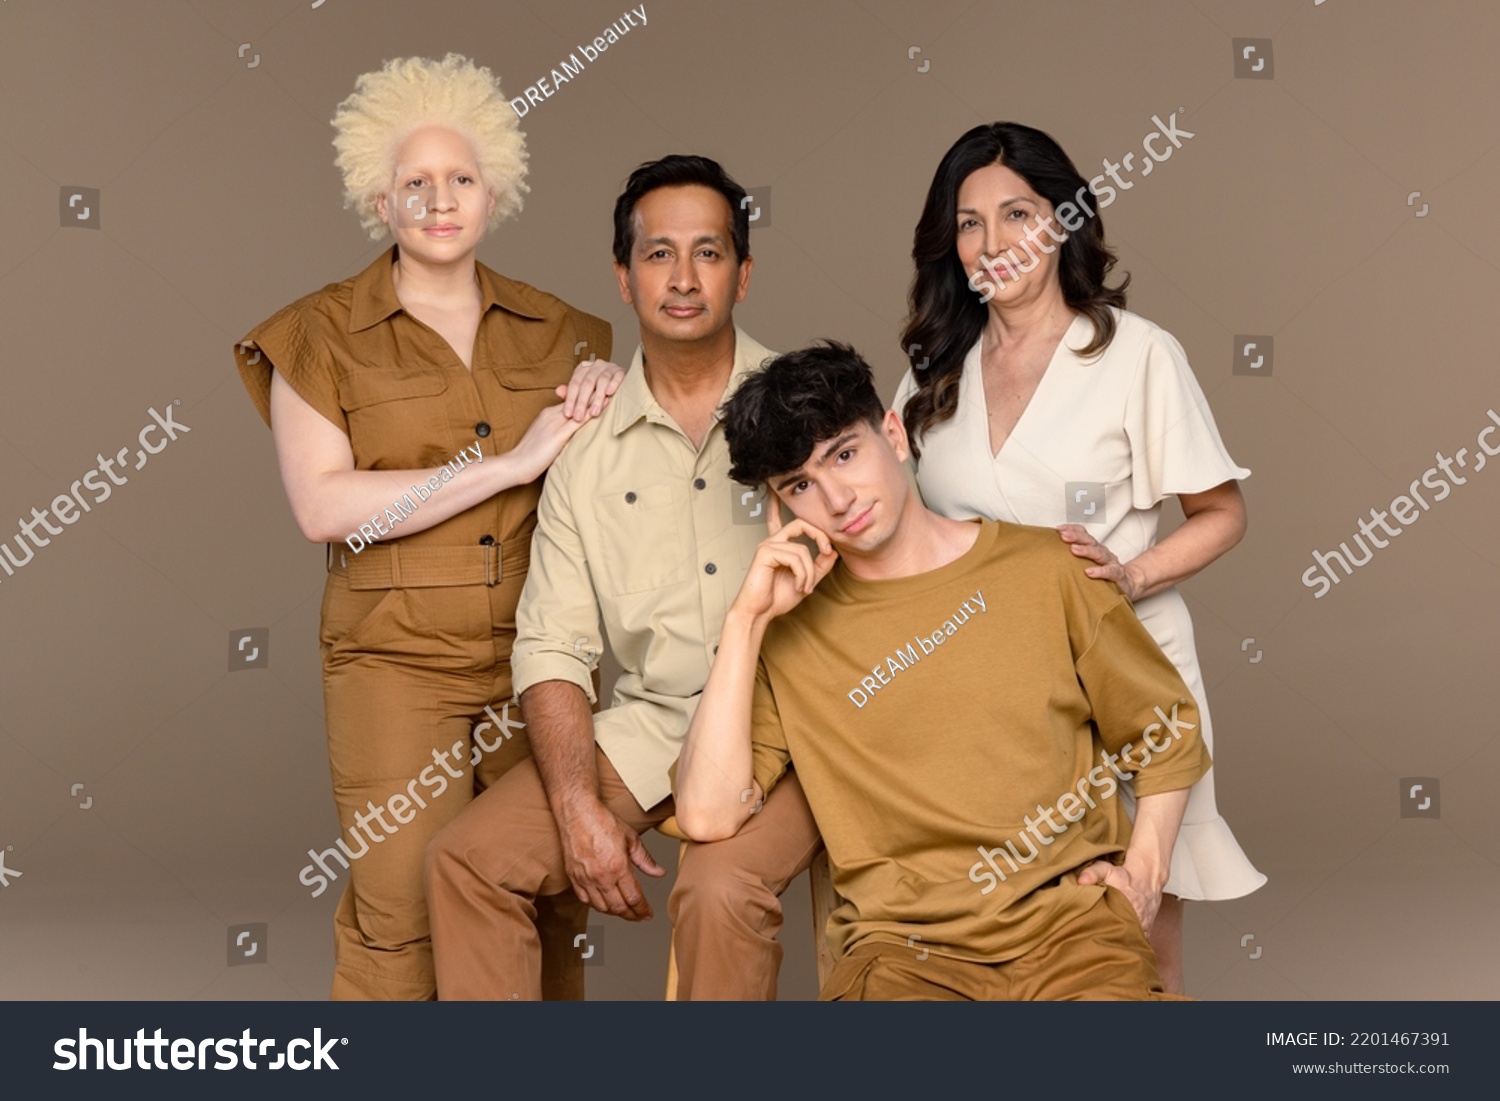 Portrait of a Black woman with albinism in her 20's, a Hispanic woman in her 50's, a non-binary Caucasian person in their 20's, and an Indian man in his 50's looking at the camera. #2201467391